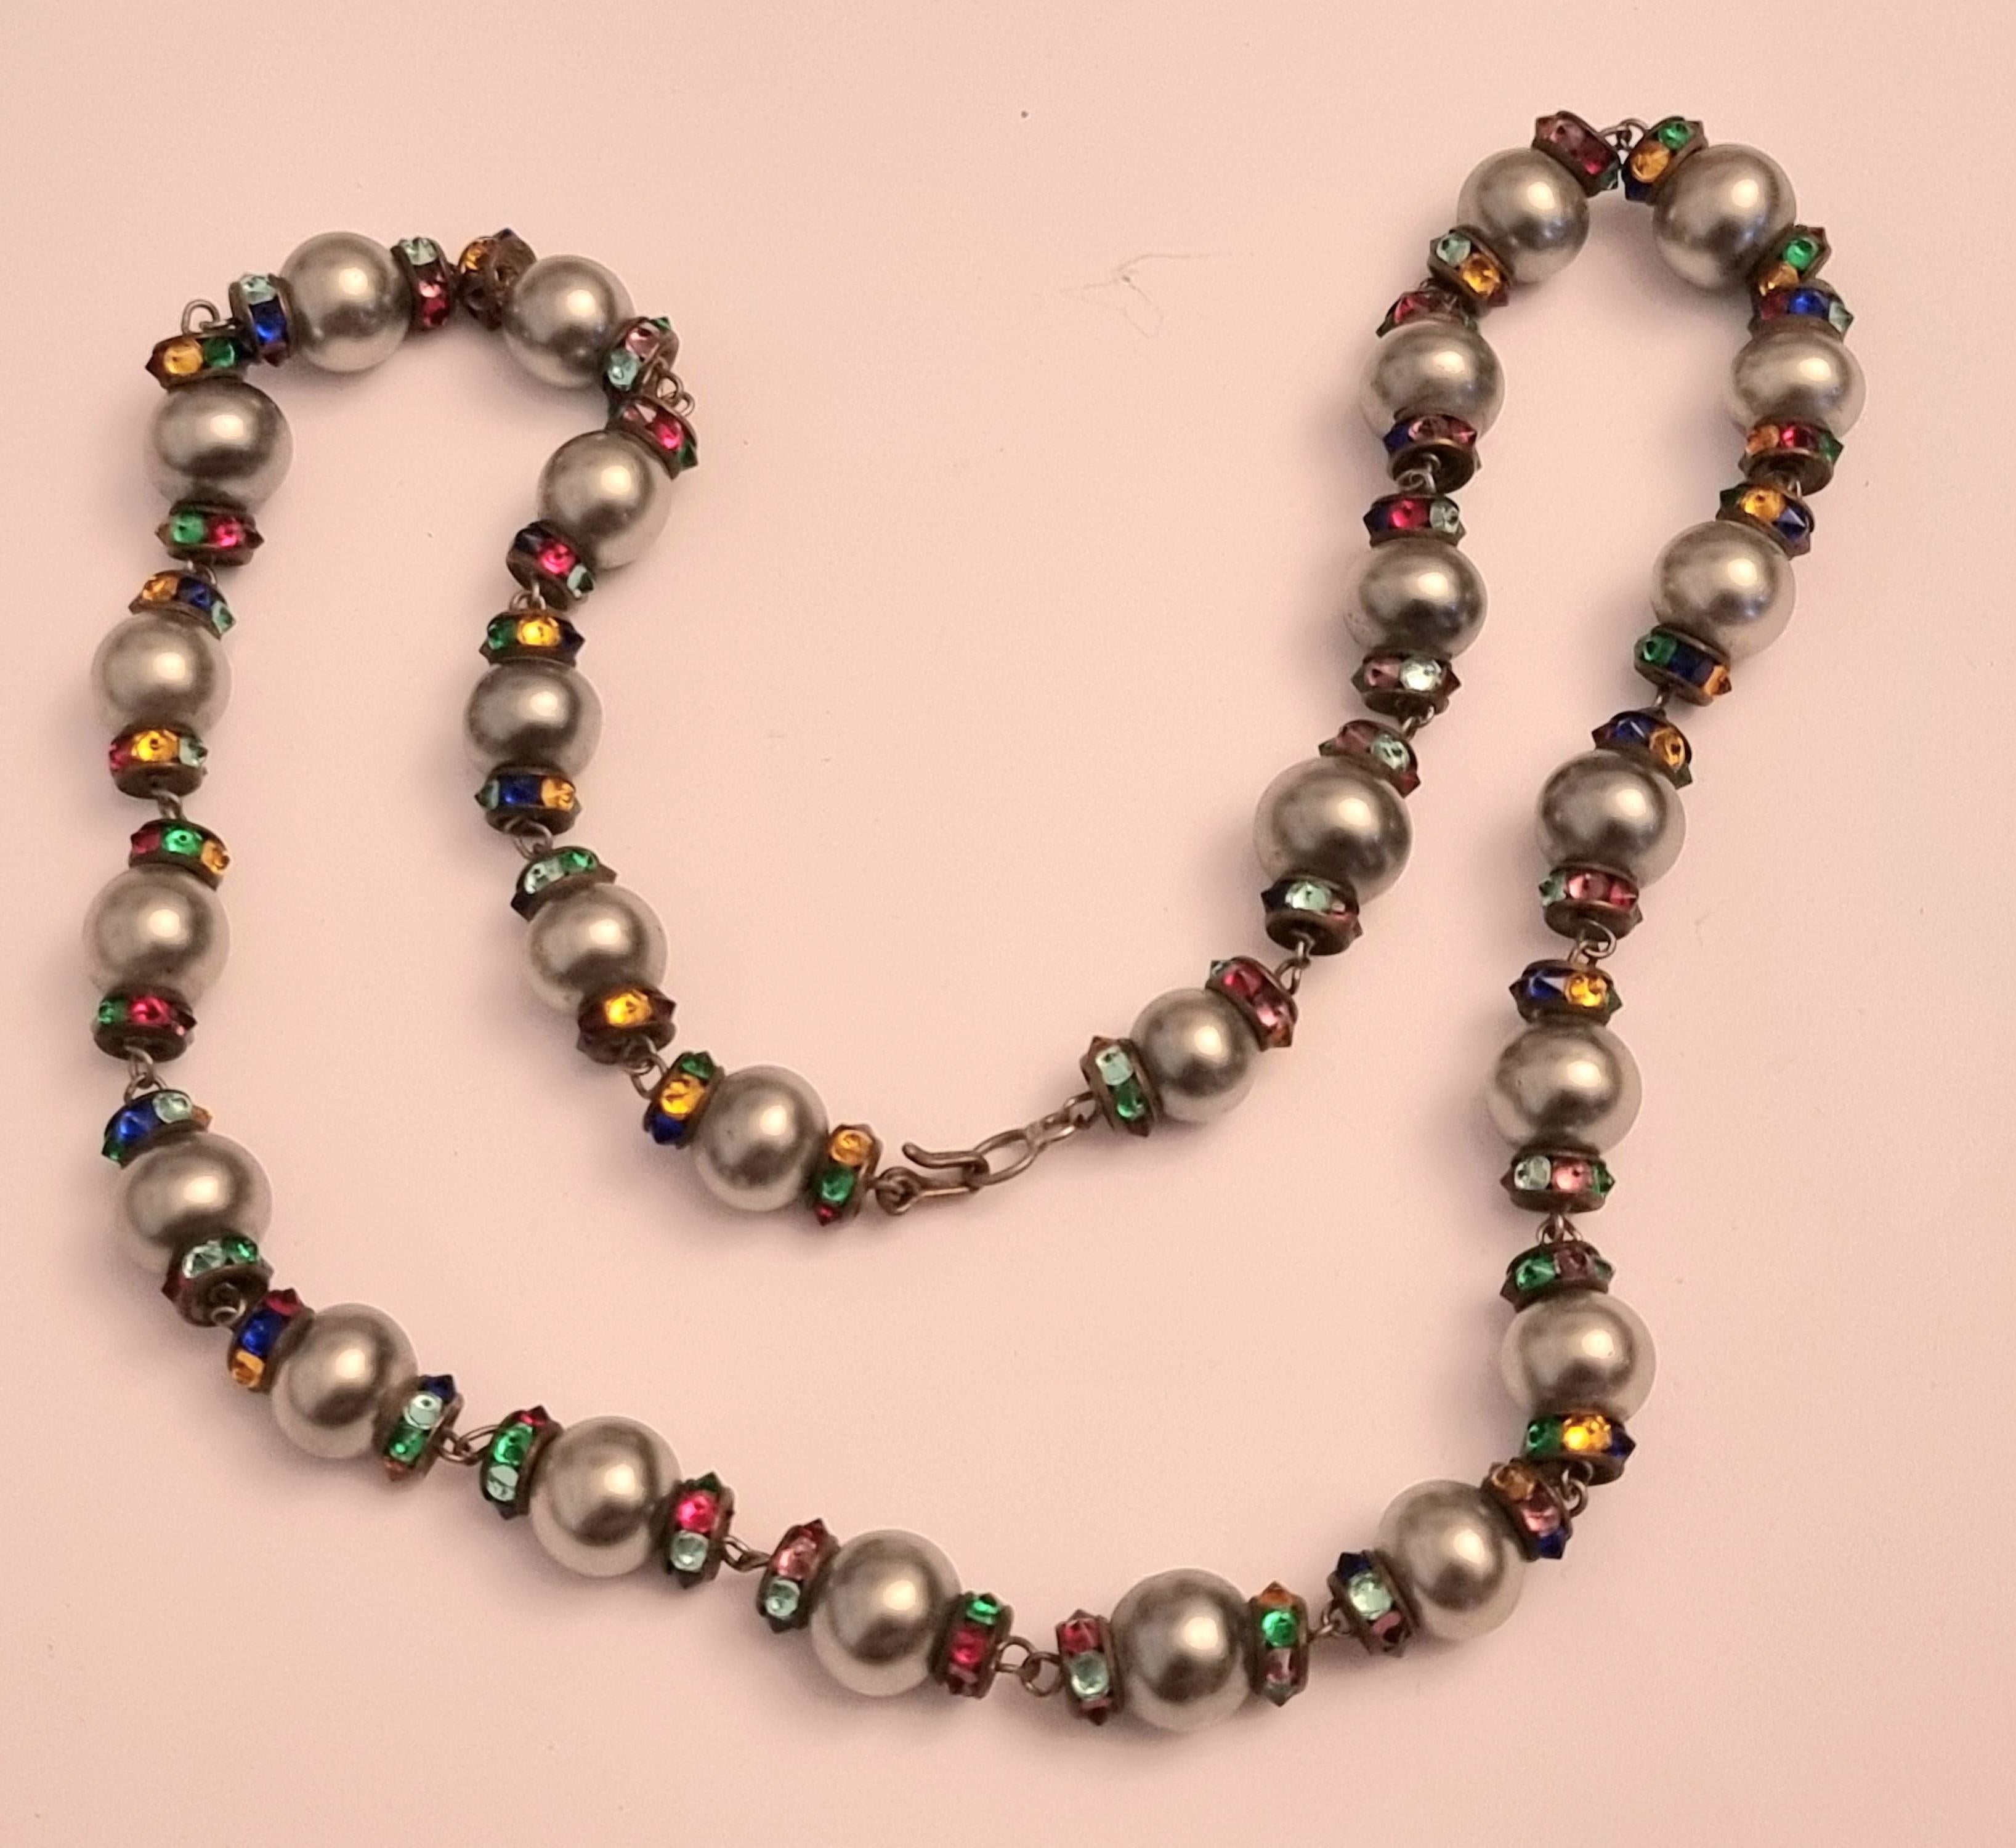 Old CHANEL necklace, Louis Rousselet pearls, rhinestones, vintage from the 40s 11